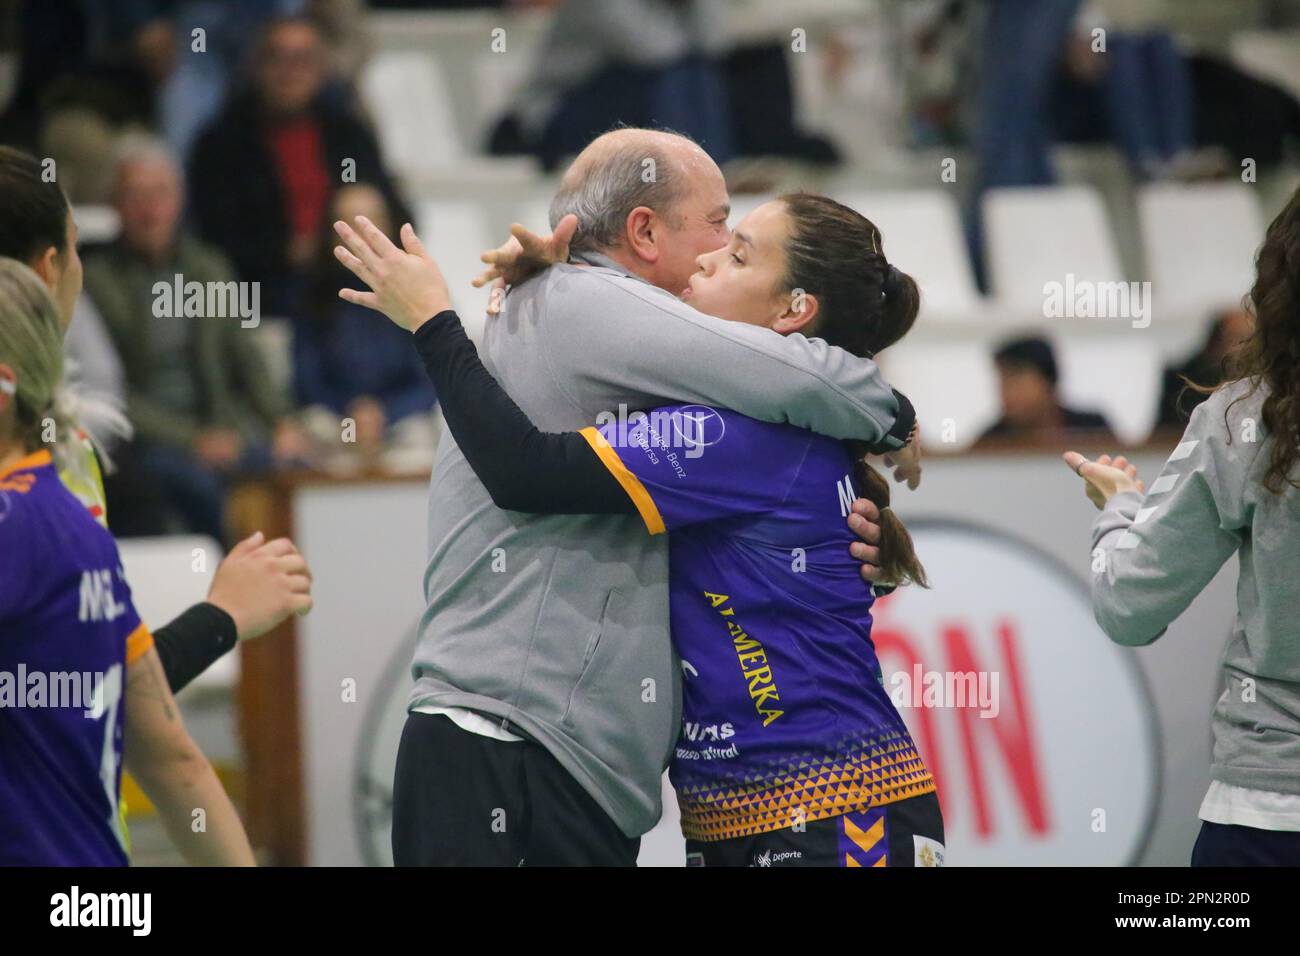 Gijon, Spain. 15th Apr, 2023. The coach of Motive.co Gijon, Luis Avelino Alvarez (L) celebrates the victory together with Marizza Alejandra Faria (9, R) during the 22nd day of the Iberdrola League 2022-23 between Motive .co Gijon and Grafometal La Rioja on April 15, 2023, at La Arena Sports Pavilion, Gijon, Spain. (Photo by Alberto Brevers/Pacific Press) Credit: Pacific Press Media Production Corp./Alamy Live News Stock Photo